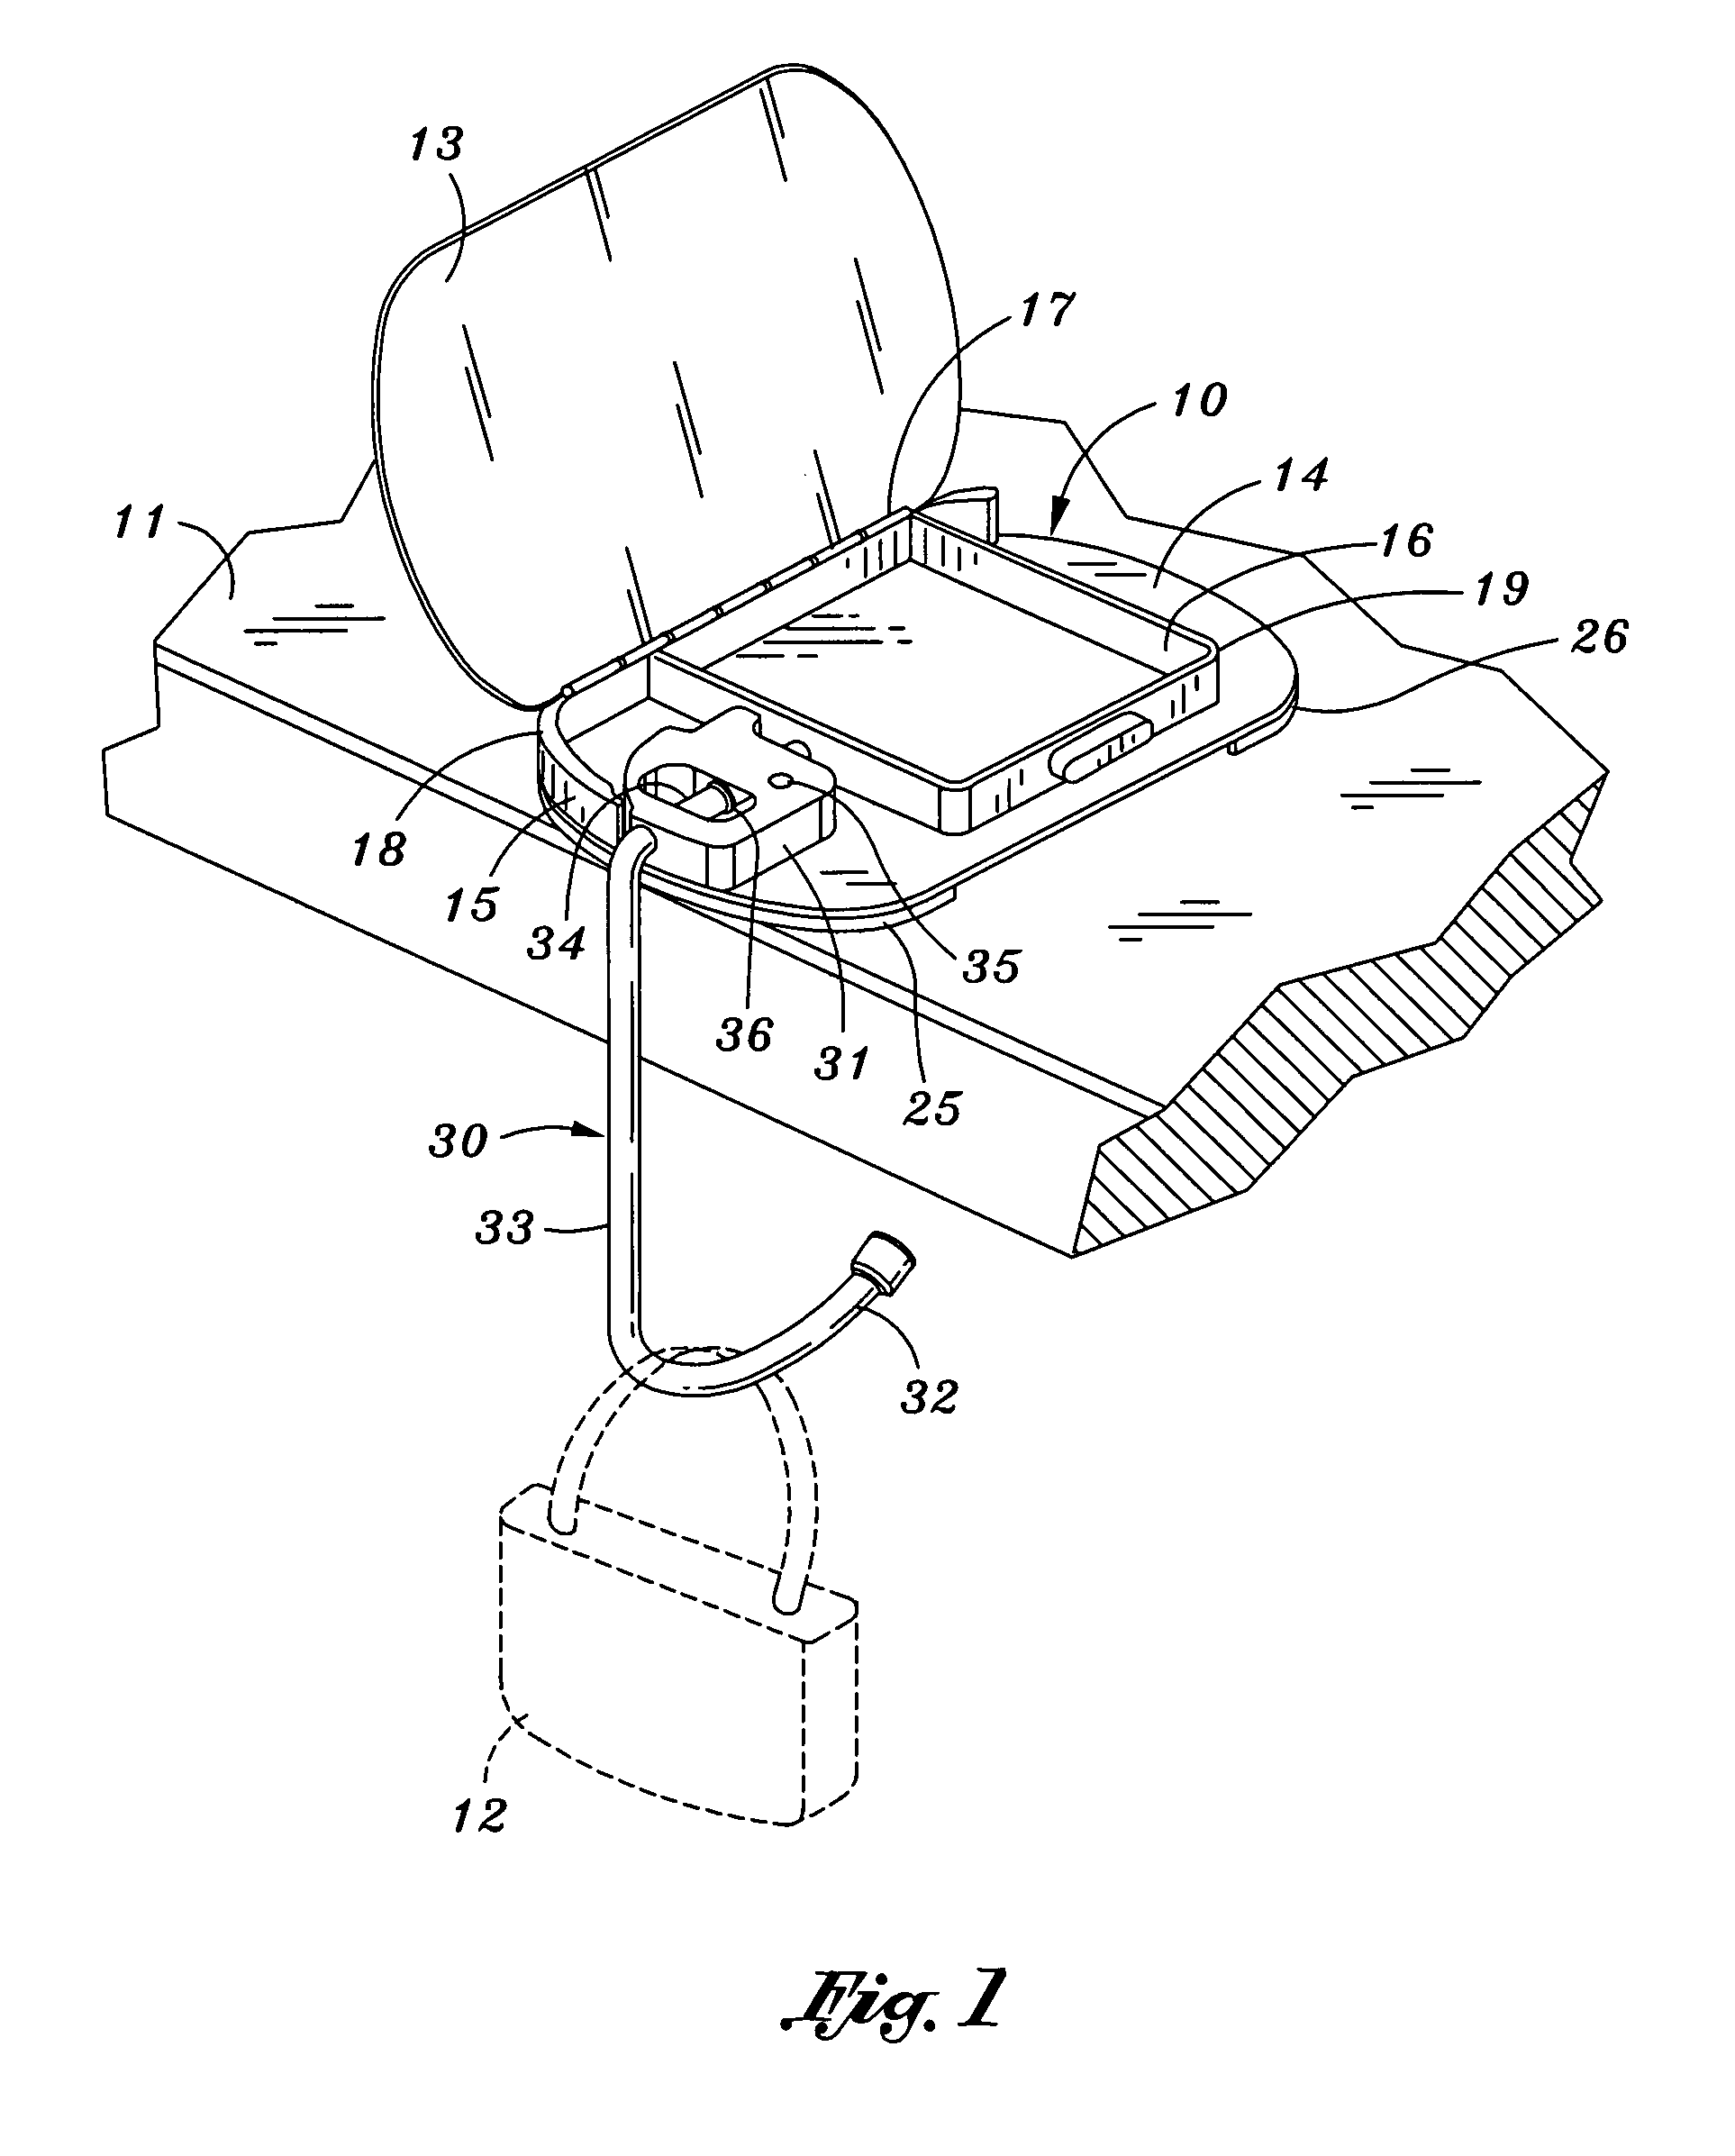 Table edge supporting apparatus